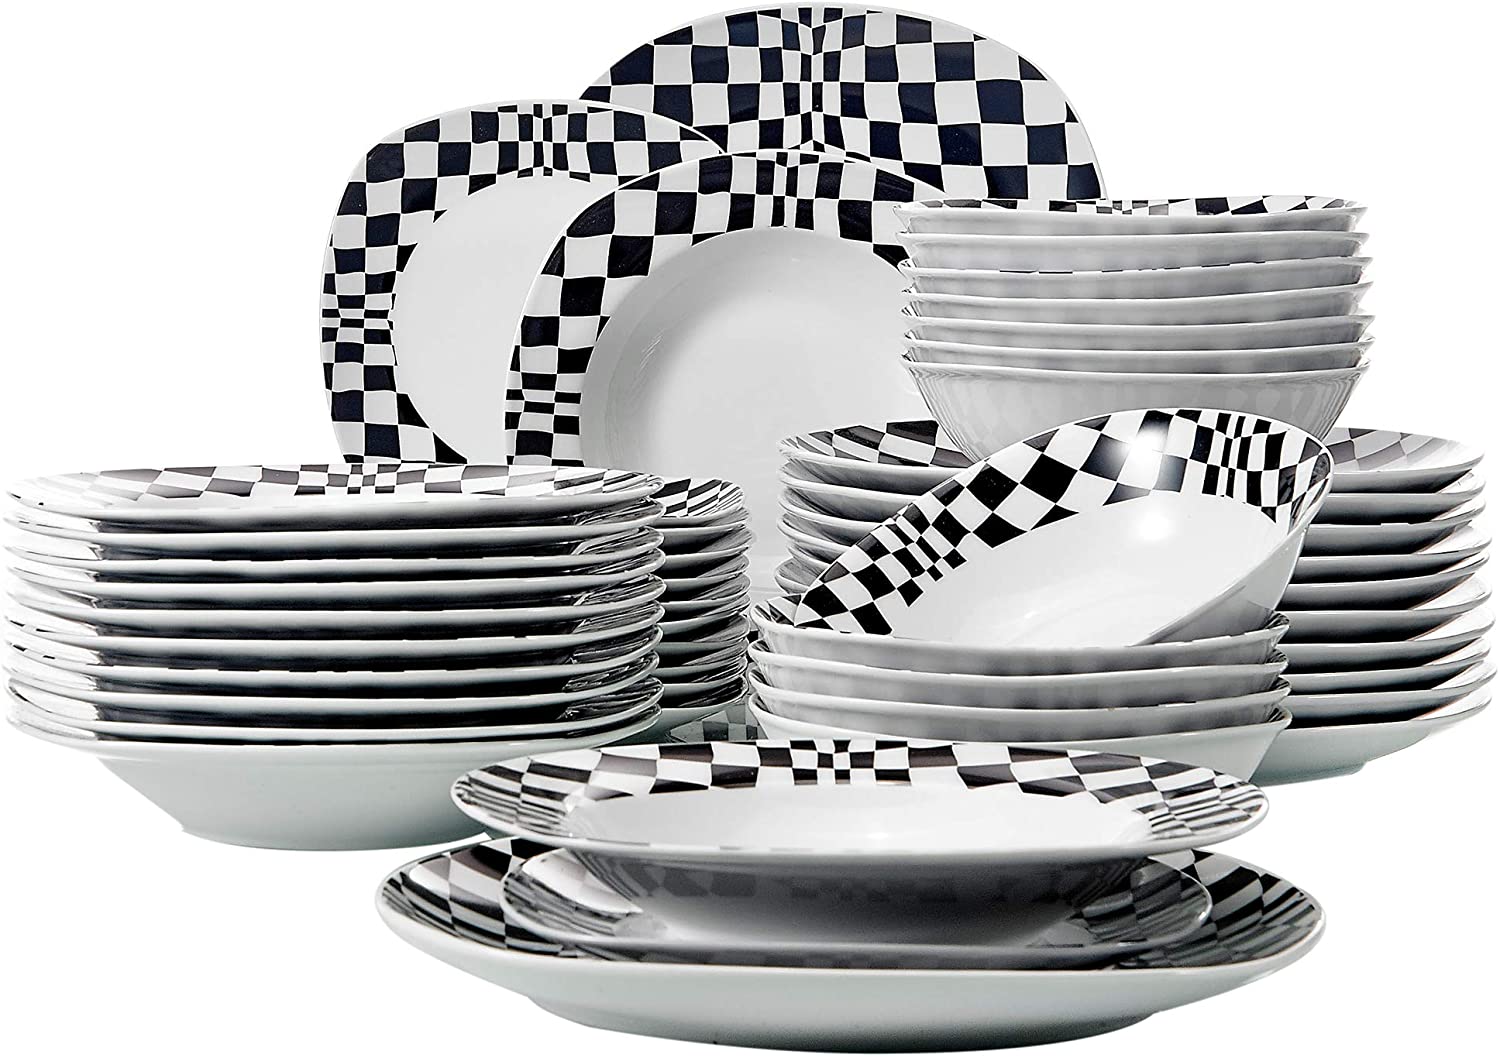 VEWEET \'Louise\' dinner service made of porcelain, 48 pieces, crockery set including cereal bowls, dessert plates, dinner plates and soup plates, dinner service for 12 people.